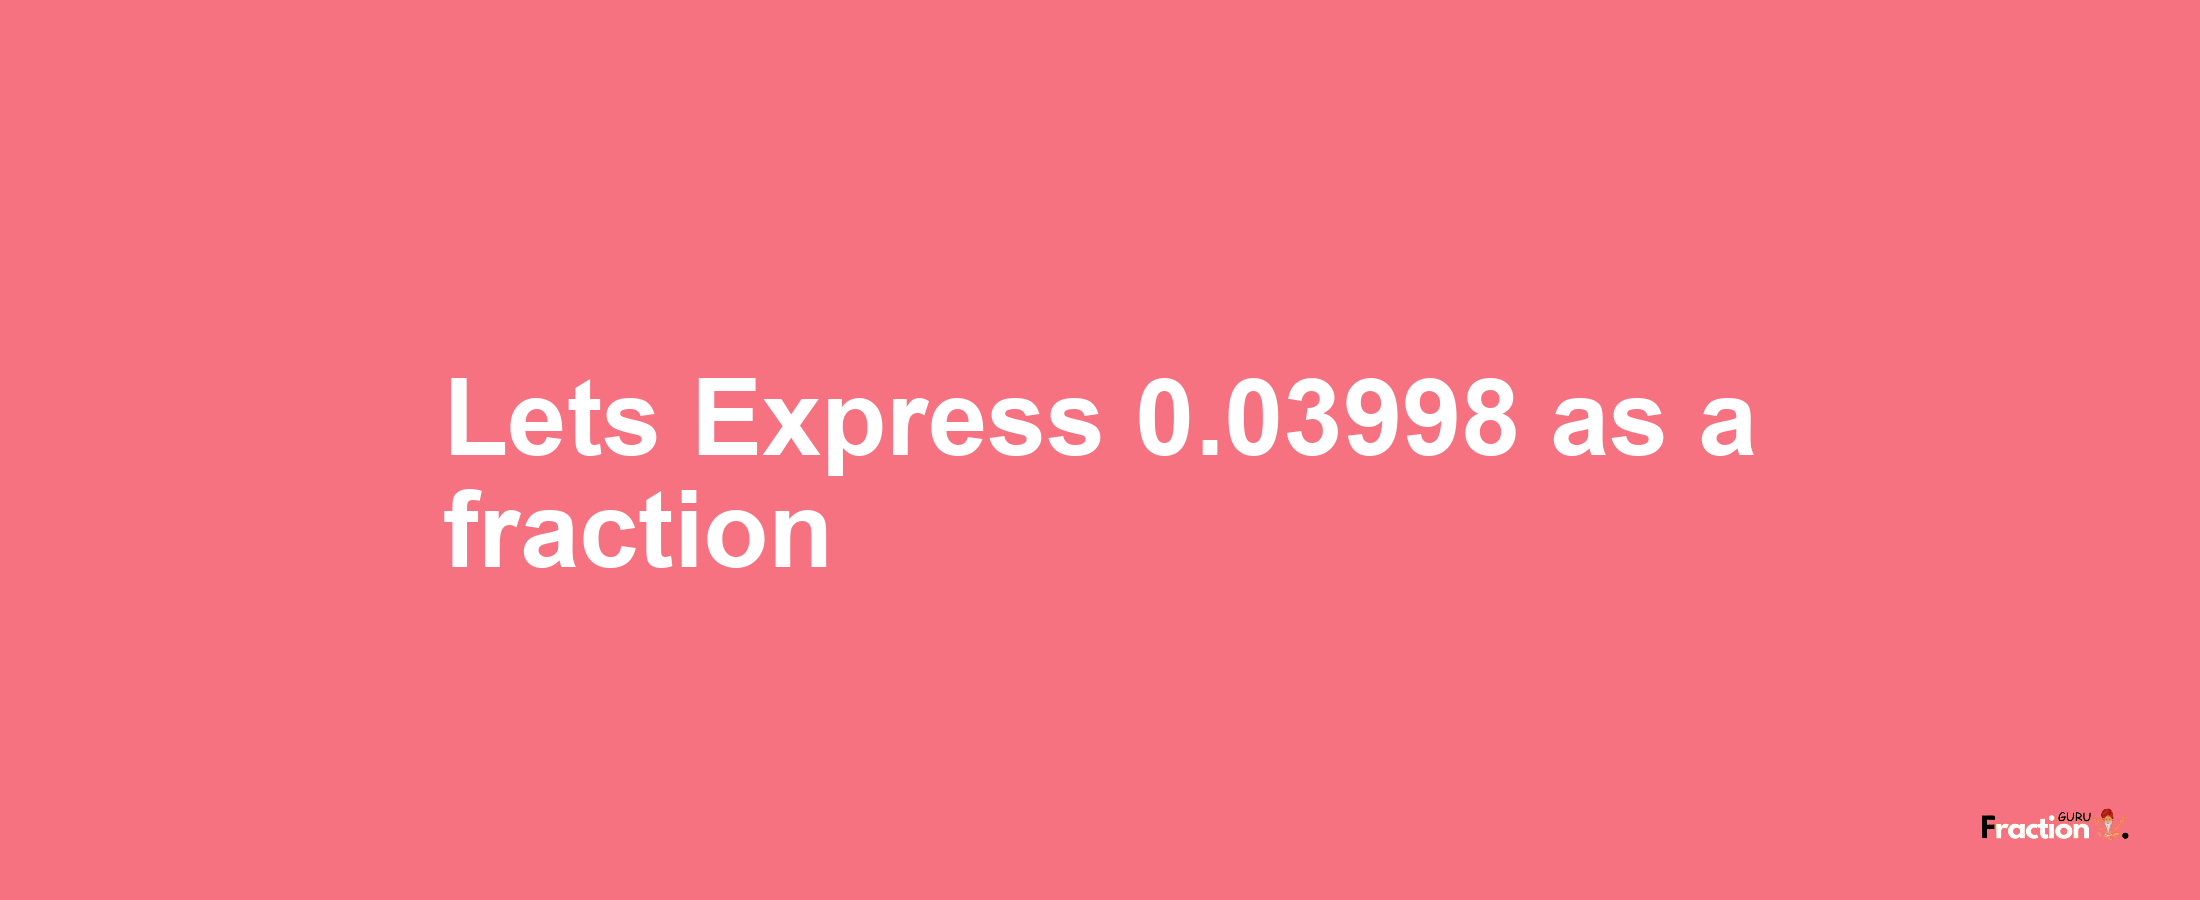 Lets Express 0.03998 as afraction